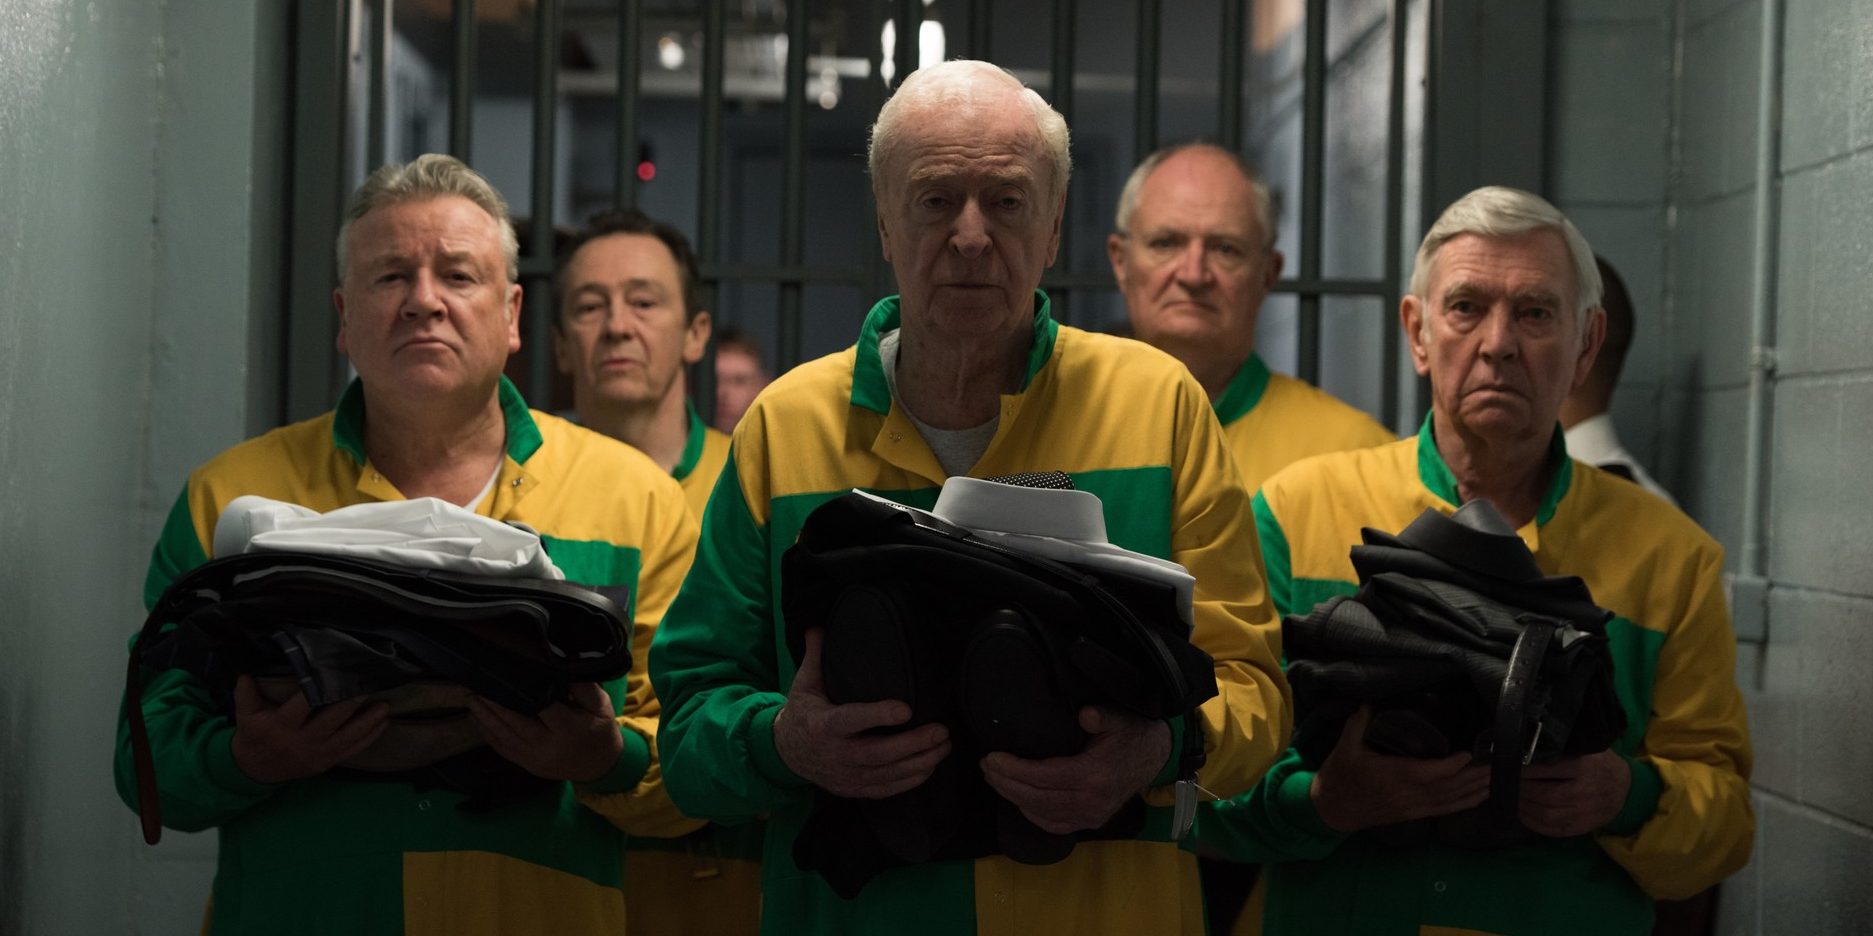 Where Was King of Thieves (2018) Filmed?